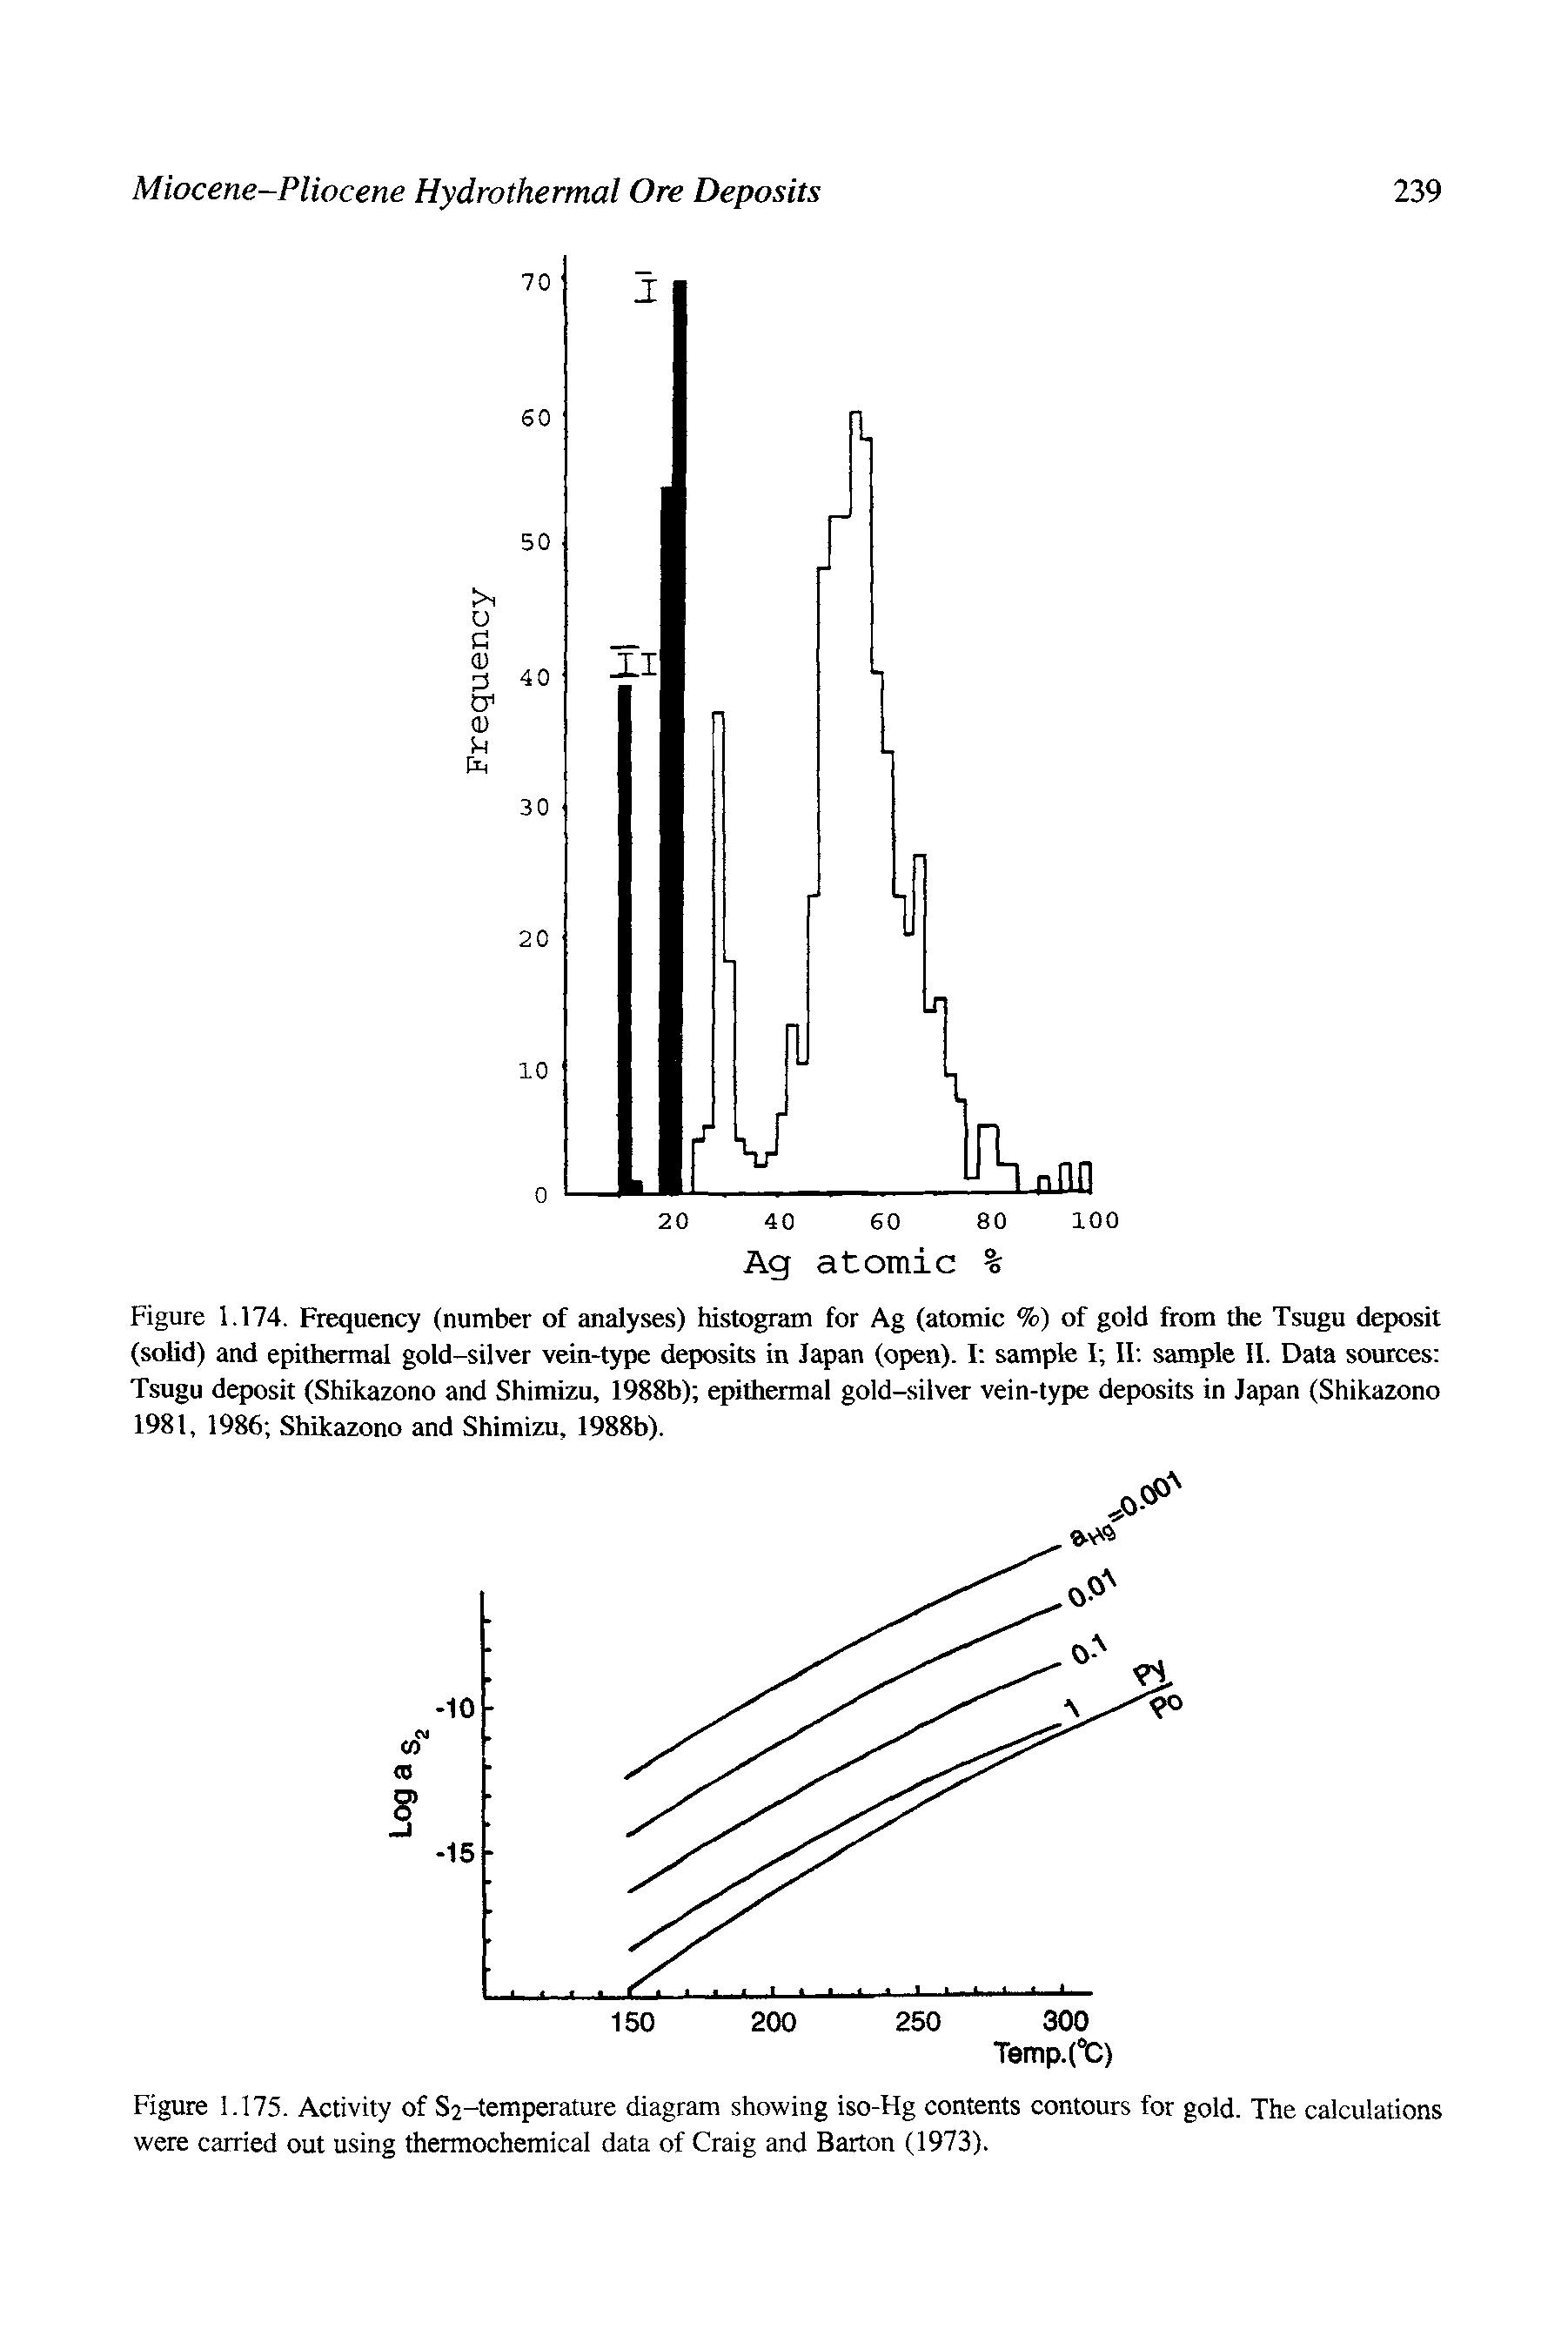 Figure 1.175. Activity of S2-temperature diagram showing iso-Hg contents contours for gold. The calculations were carried out using thermochemical data of Craig and Barton (1973).